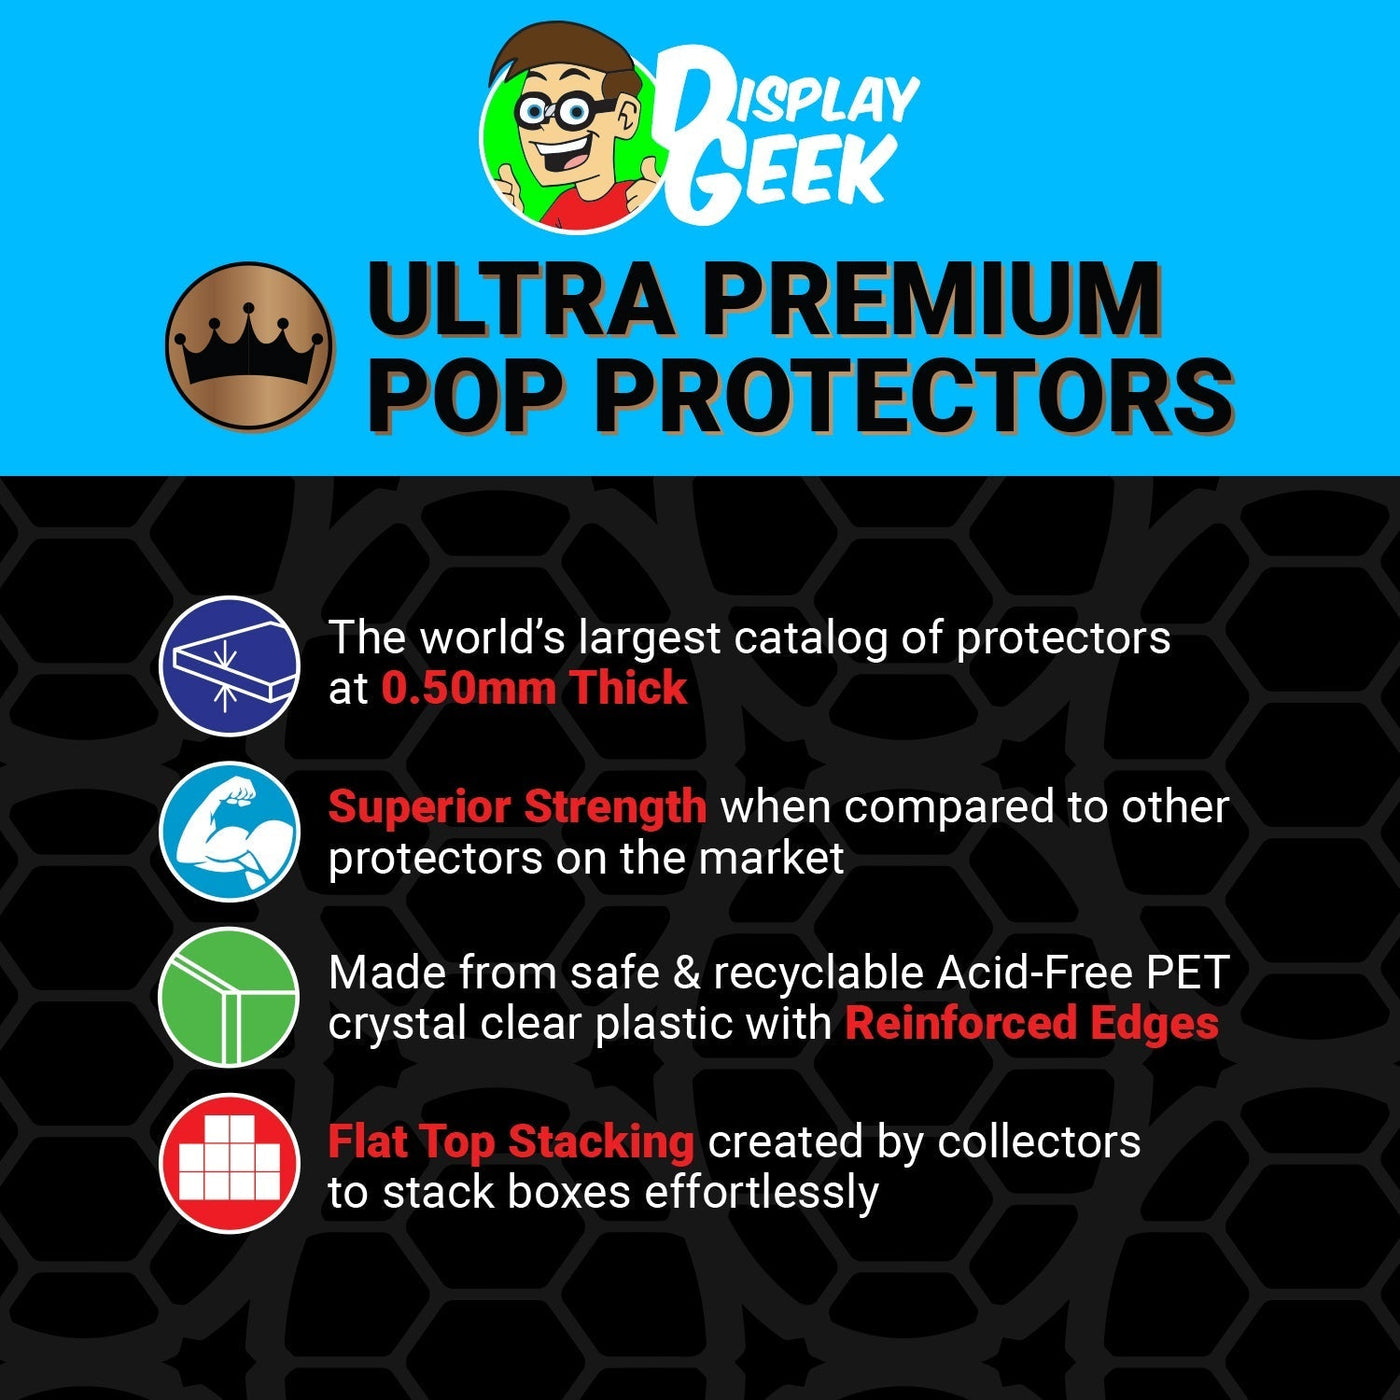 Pop Protector for 4 Pack Wayne Gretzky Funko Pop on The Protector Guide App by Display Geek